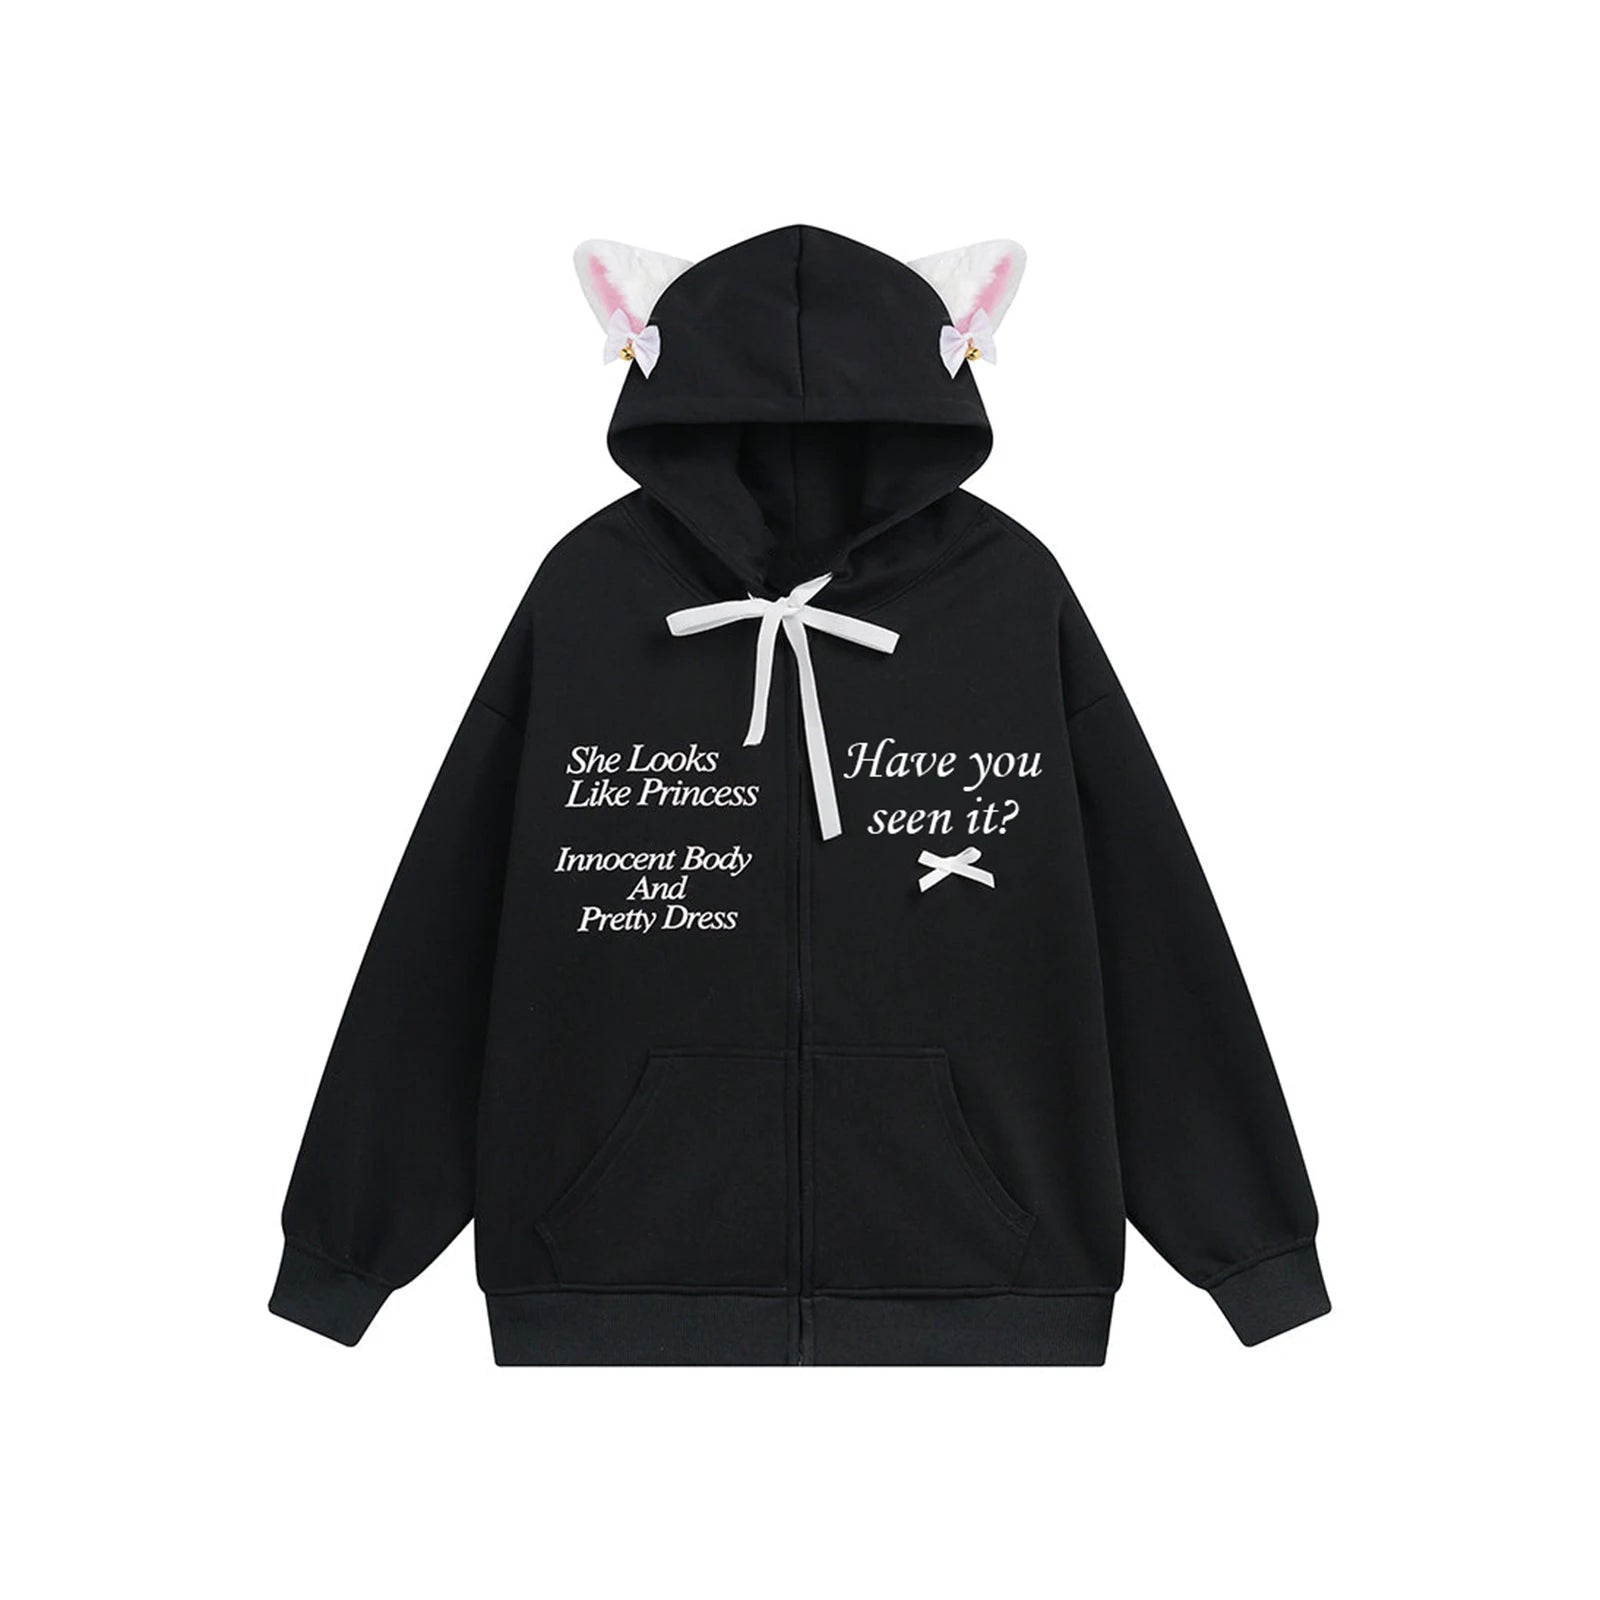 Women s Oversized Zip Up Hoodies Sweatshirts Y2K Clothes Cute Teen Girl Fall Casual Drawstring Jackets with Pockets voguable